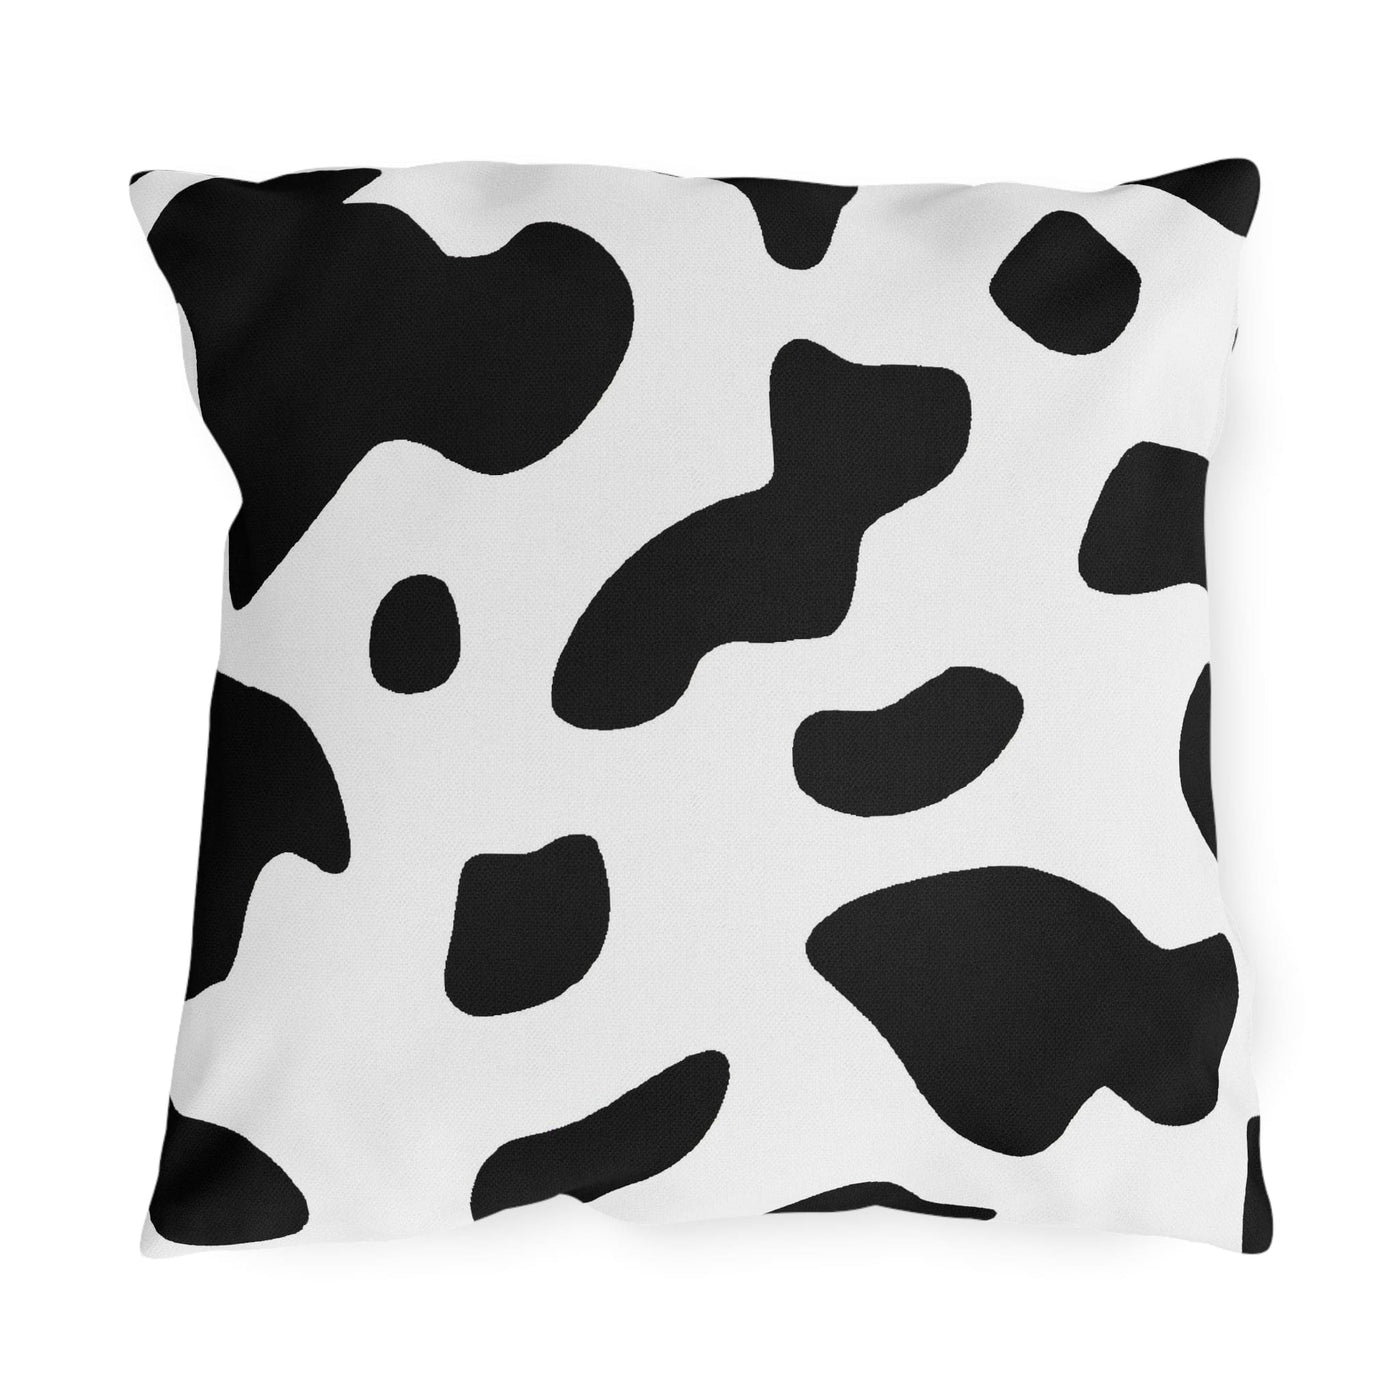 Decorative Outdoor Pillows With Zipper - Set Of 2 Black And White Abstract Cow